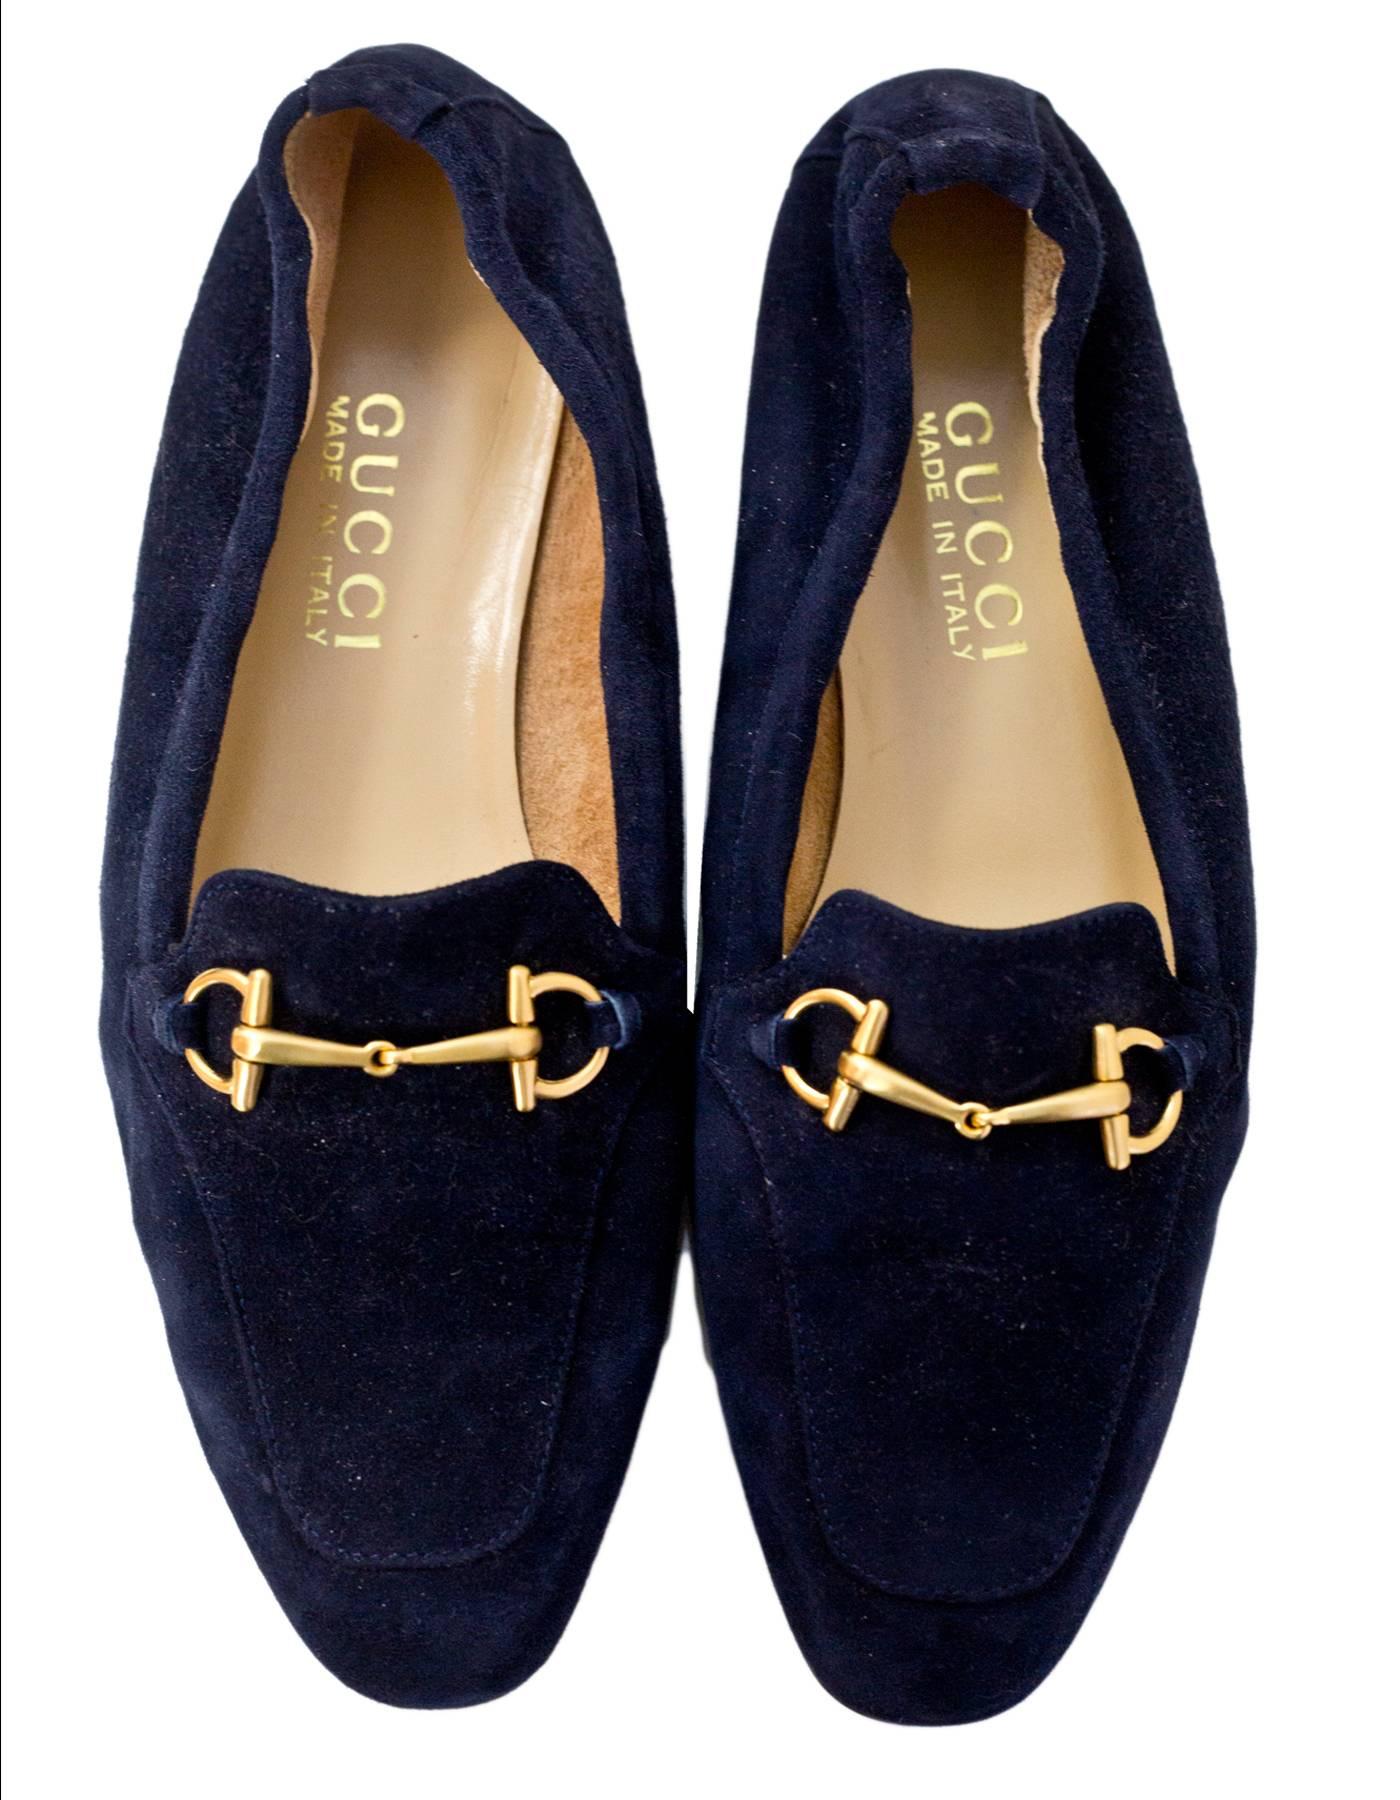 Black Gucci Navy Suede Horsebit Loafers Size 37C New